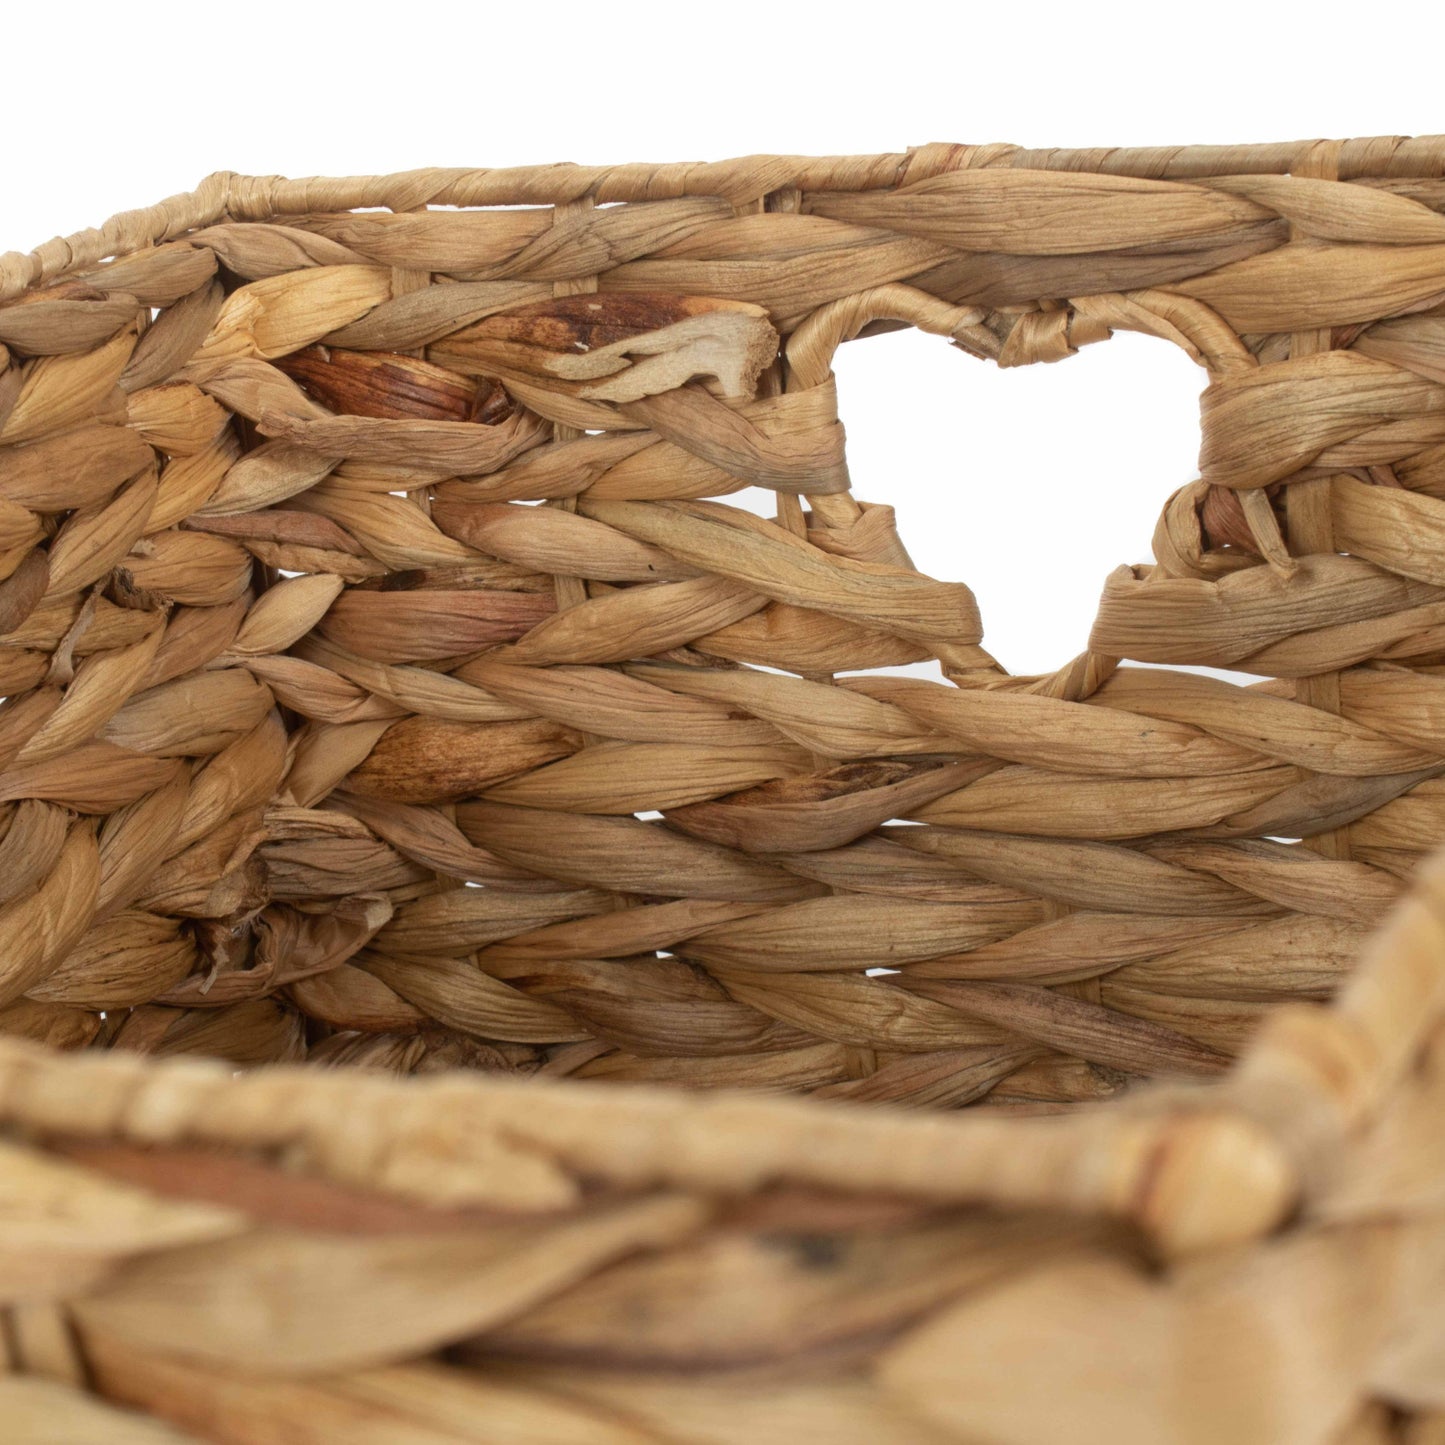 Small Water Hyacinth Storage Basket Size 2 With Heart Cut-out